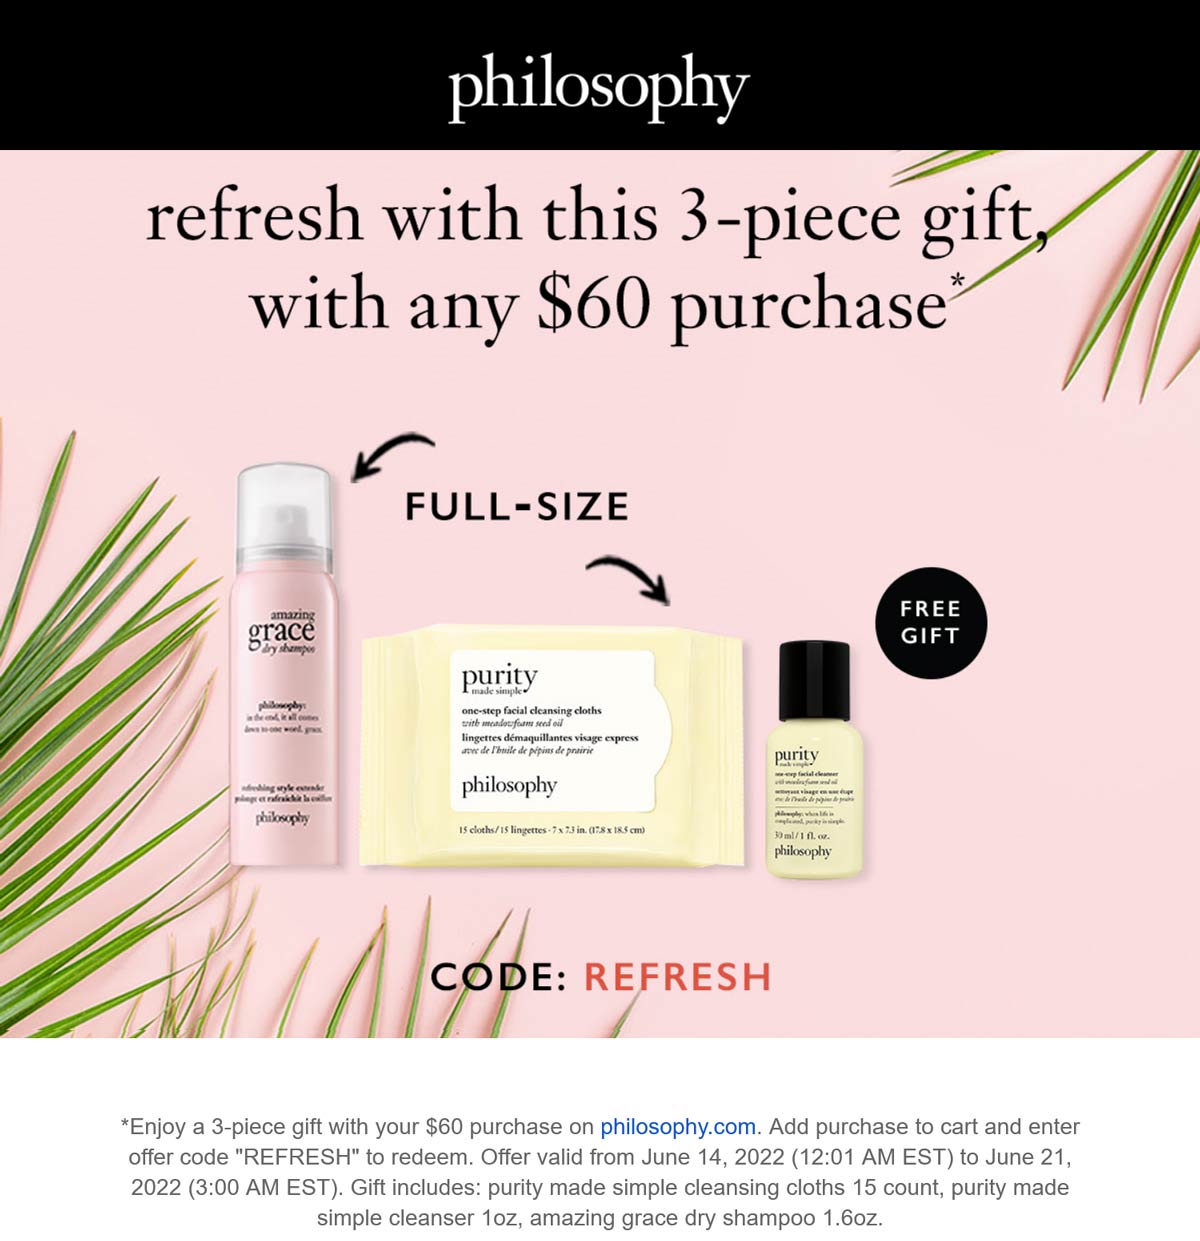 Philosophy stores Coupon  Free full sized 3-pc on $60 today at Philosophy via promo code REFRESH #philosophy 